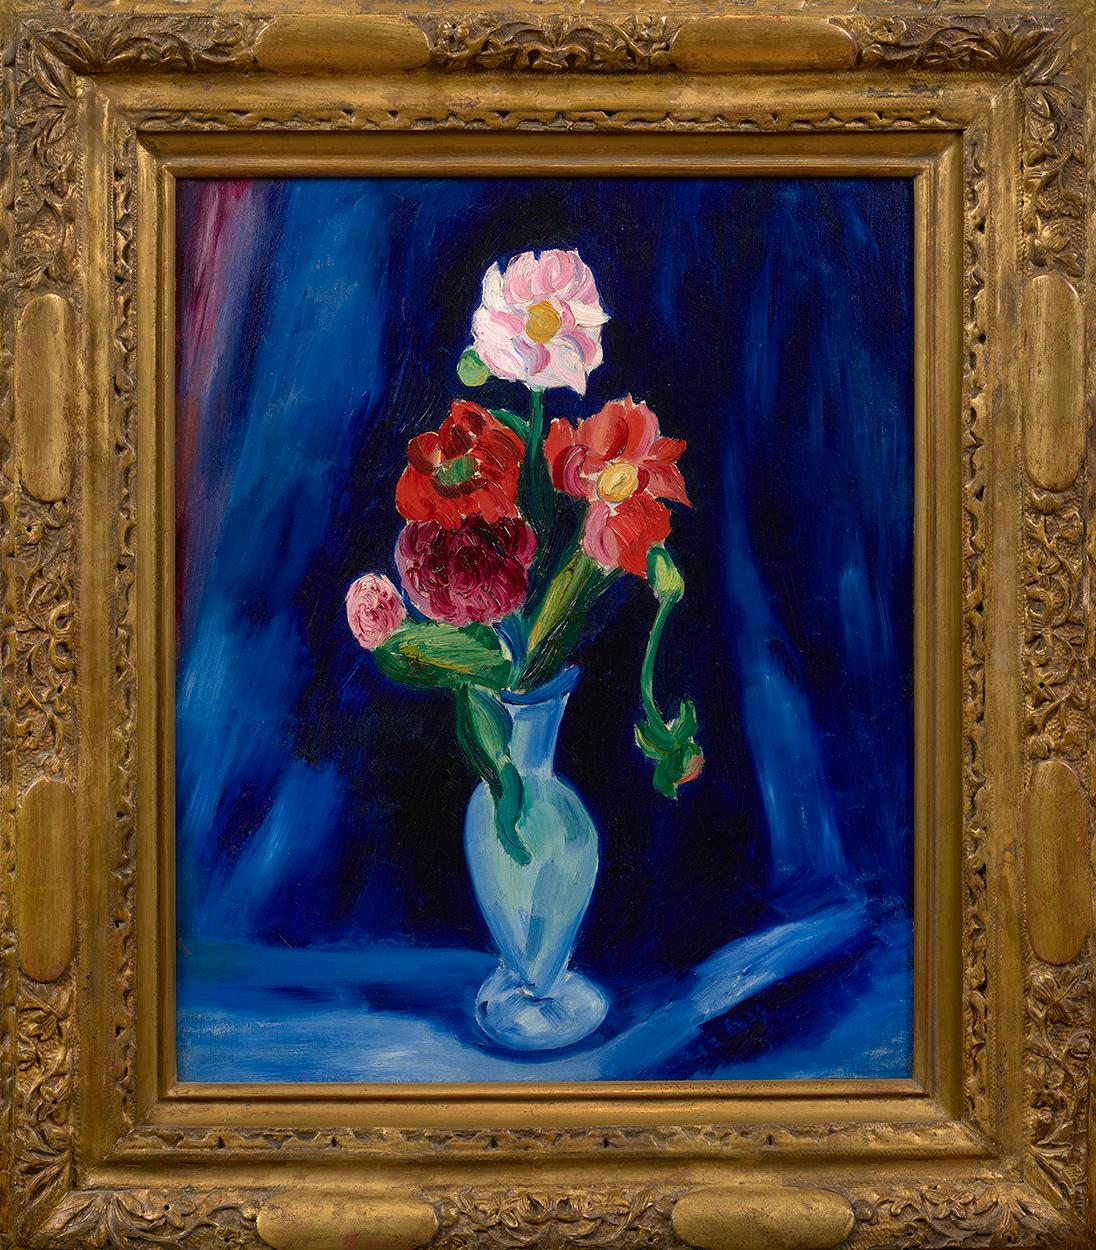 Flowers - Painting by Marsden Hartley